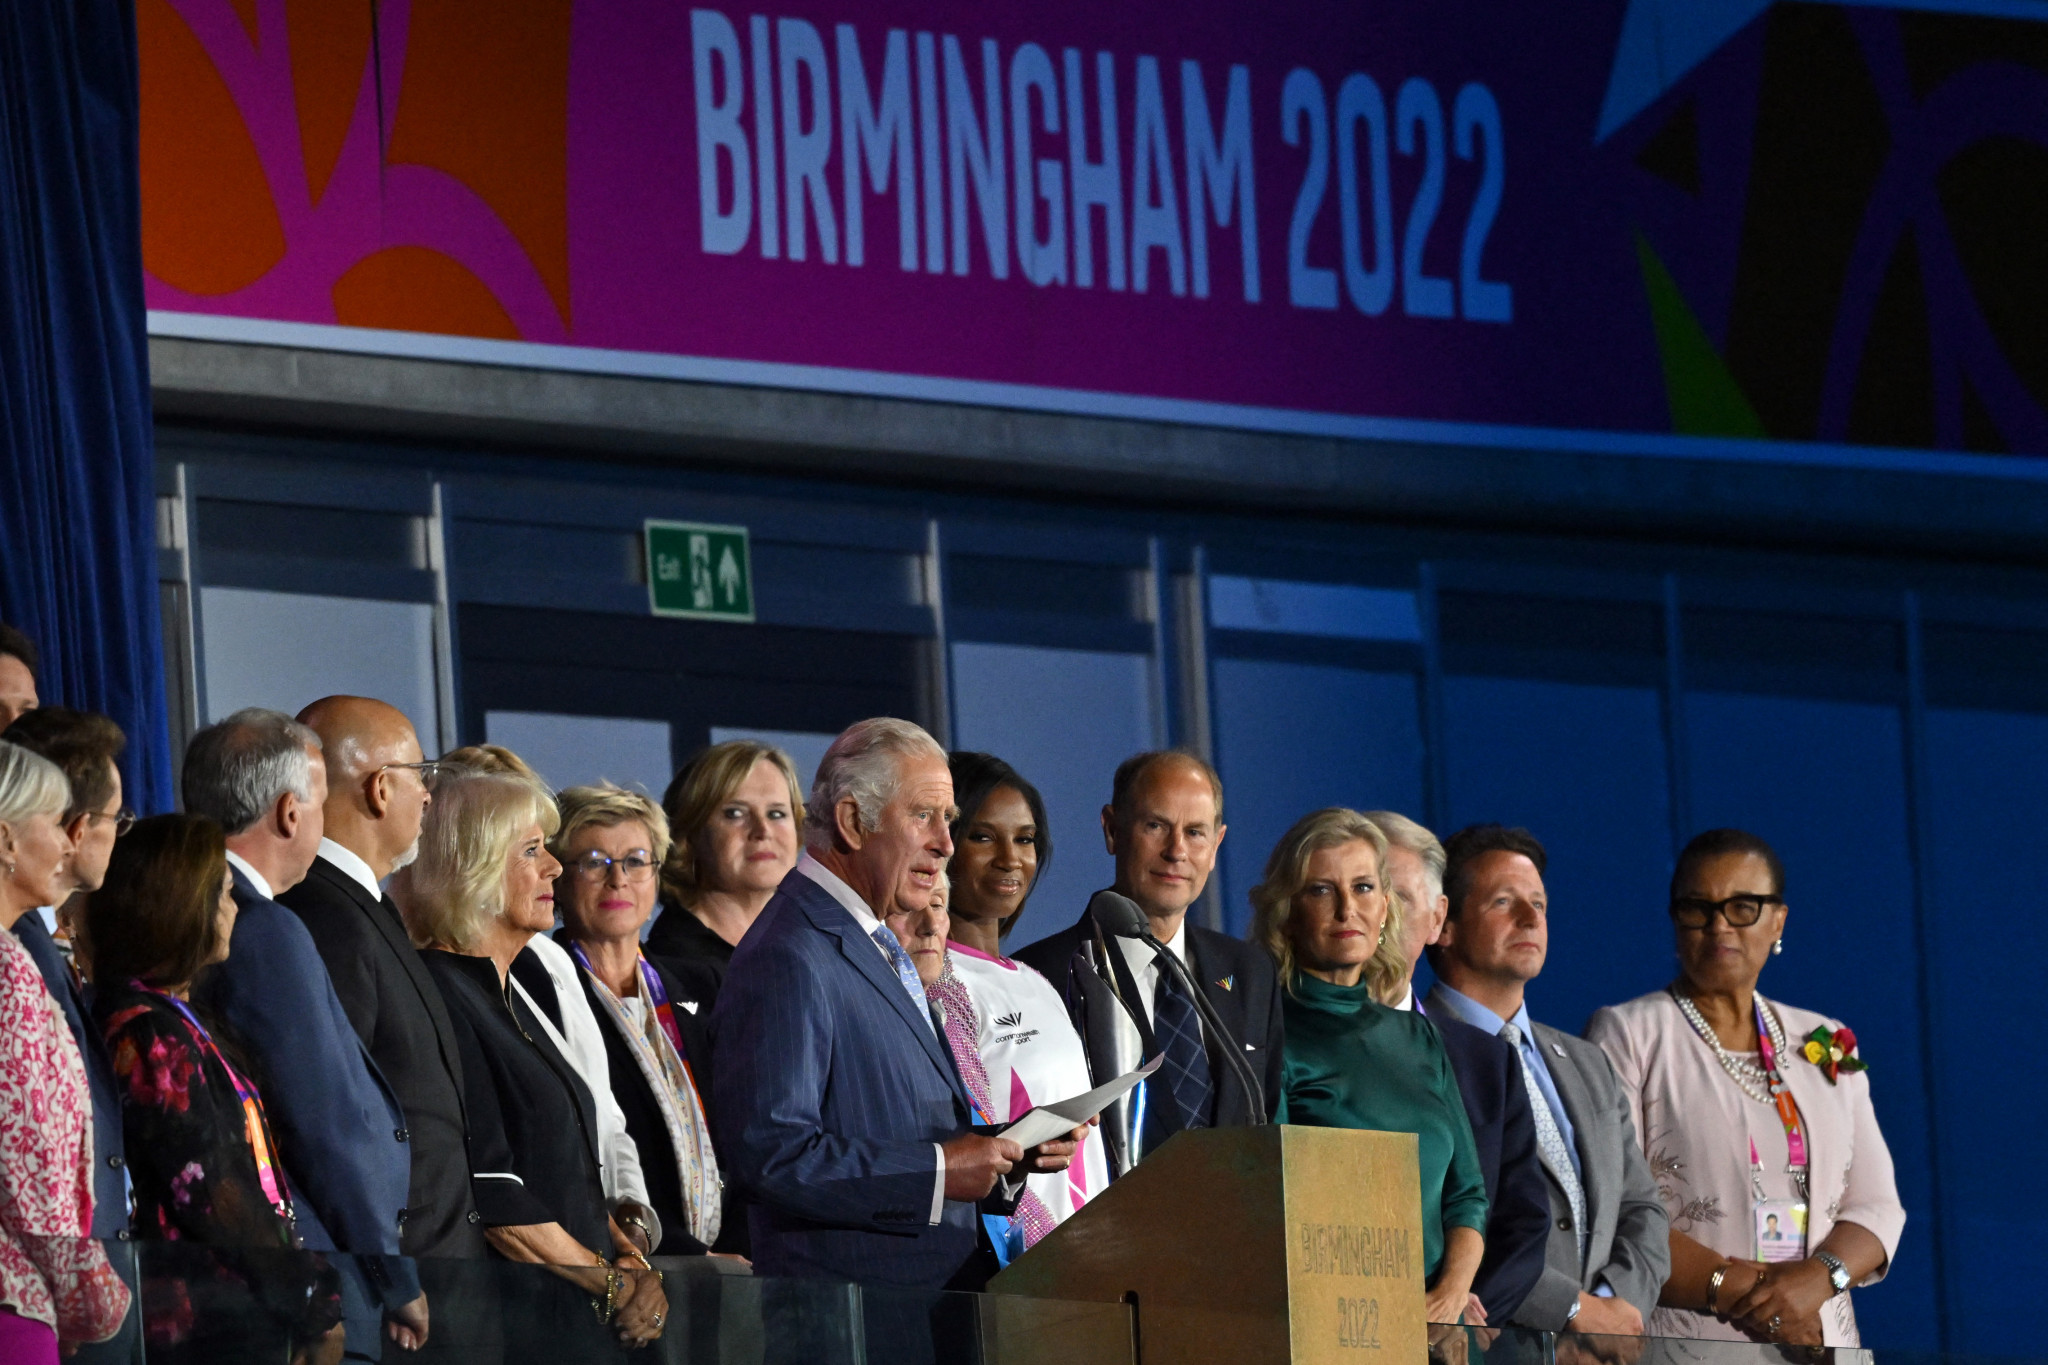 insidethegames.biz is reporting LIVE from the Birmingham 2022 Commonwealth Games